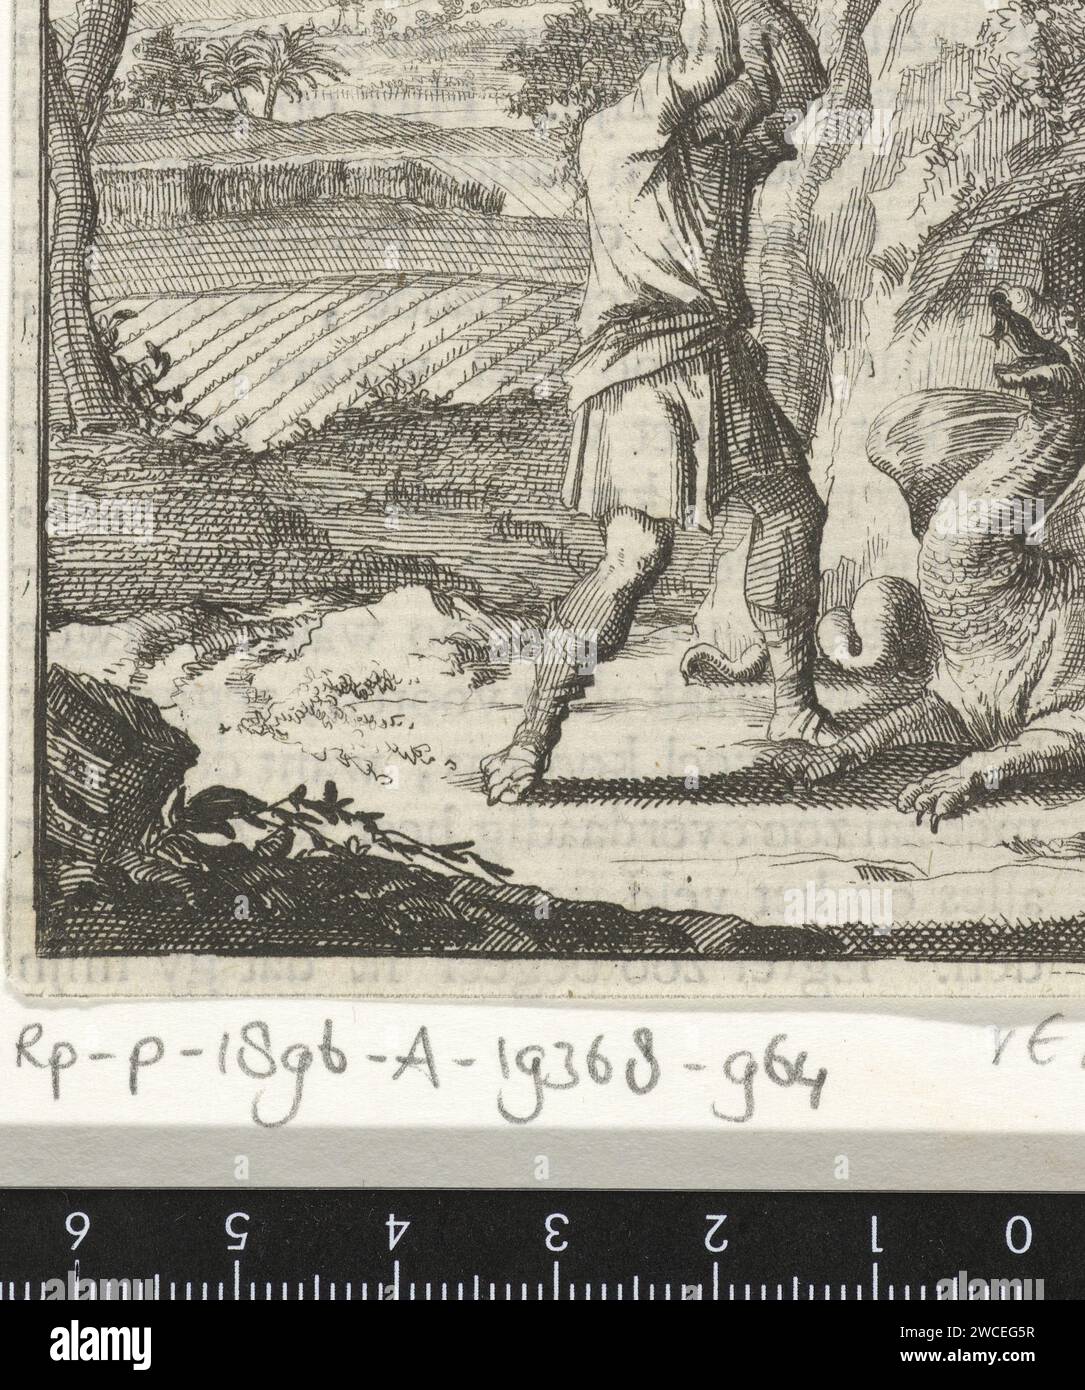 Man fights a dragon that has emerged from his cave, Jan Luyken, 1693 print  Amsterdam paper etching / letterpress printing dragon. man killing animal Stock Photo